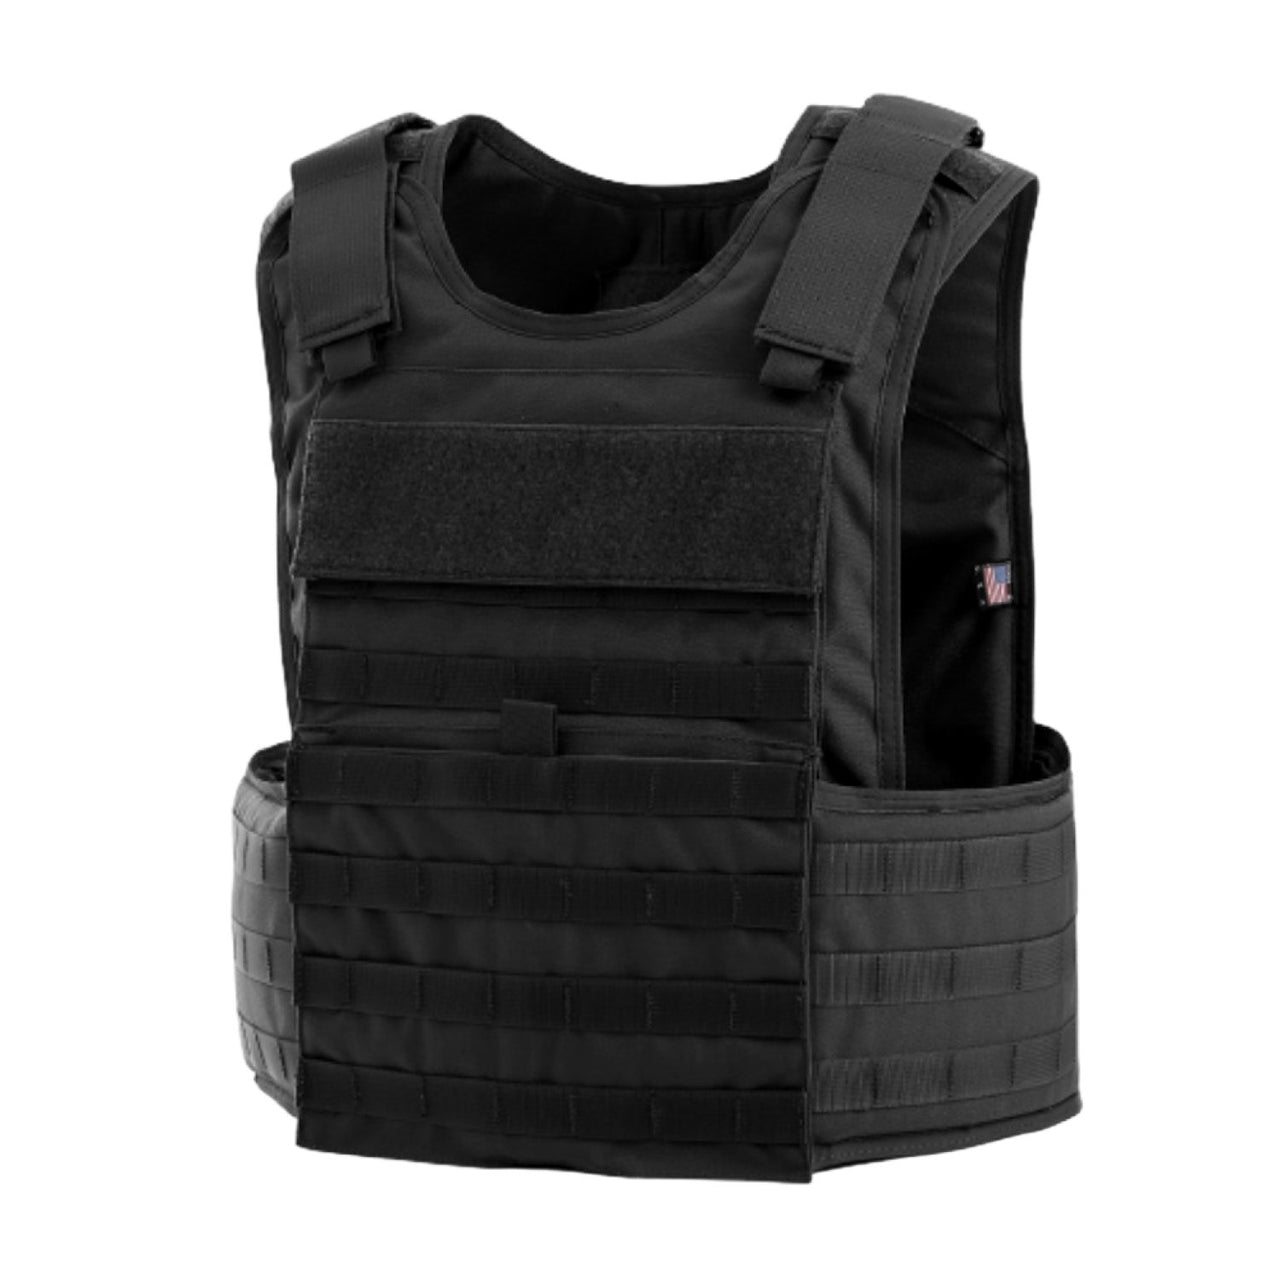 Body Armor Direct Patriot Tactical Carrier with adjustable shoulders isolated on a white background.